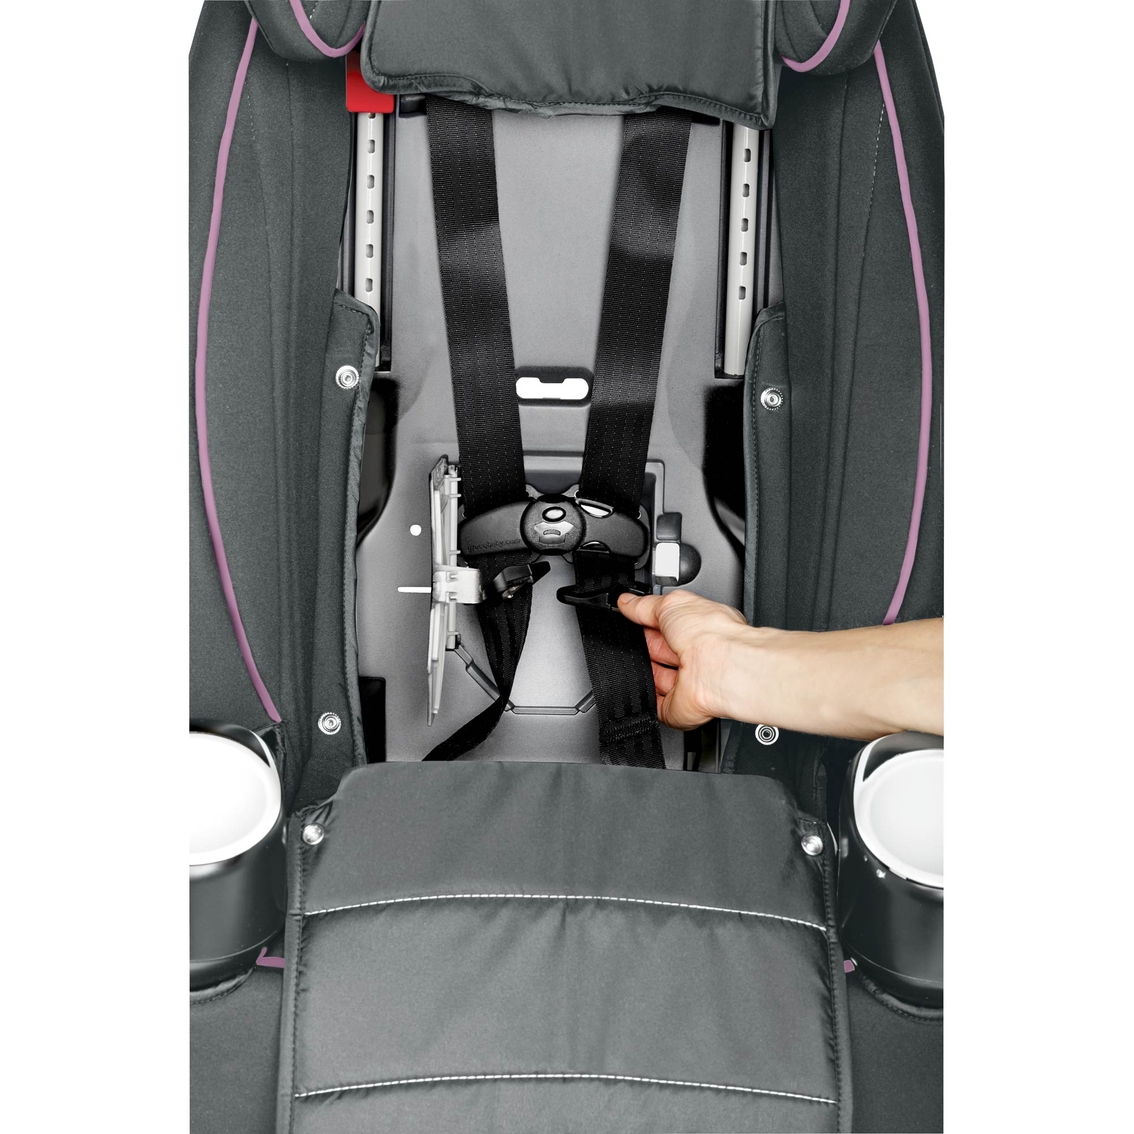 Graco Atlas 65 2 in 1 Harness Booster - Image 3 of 4